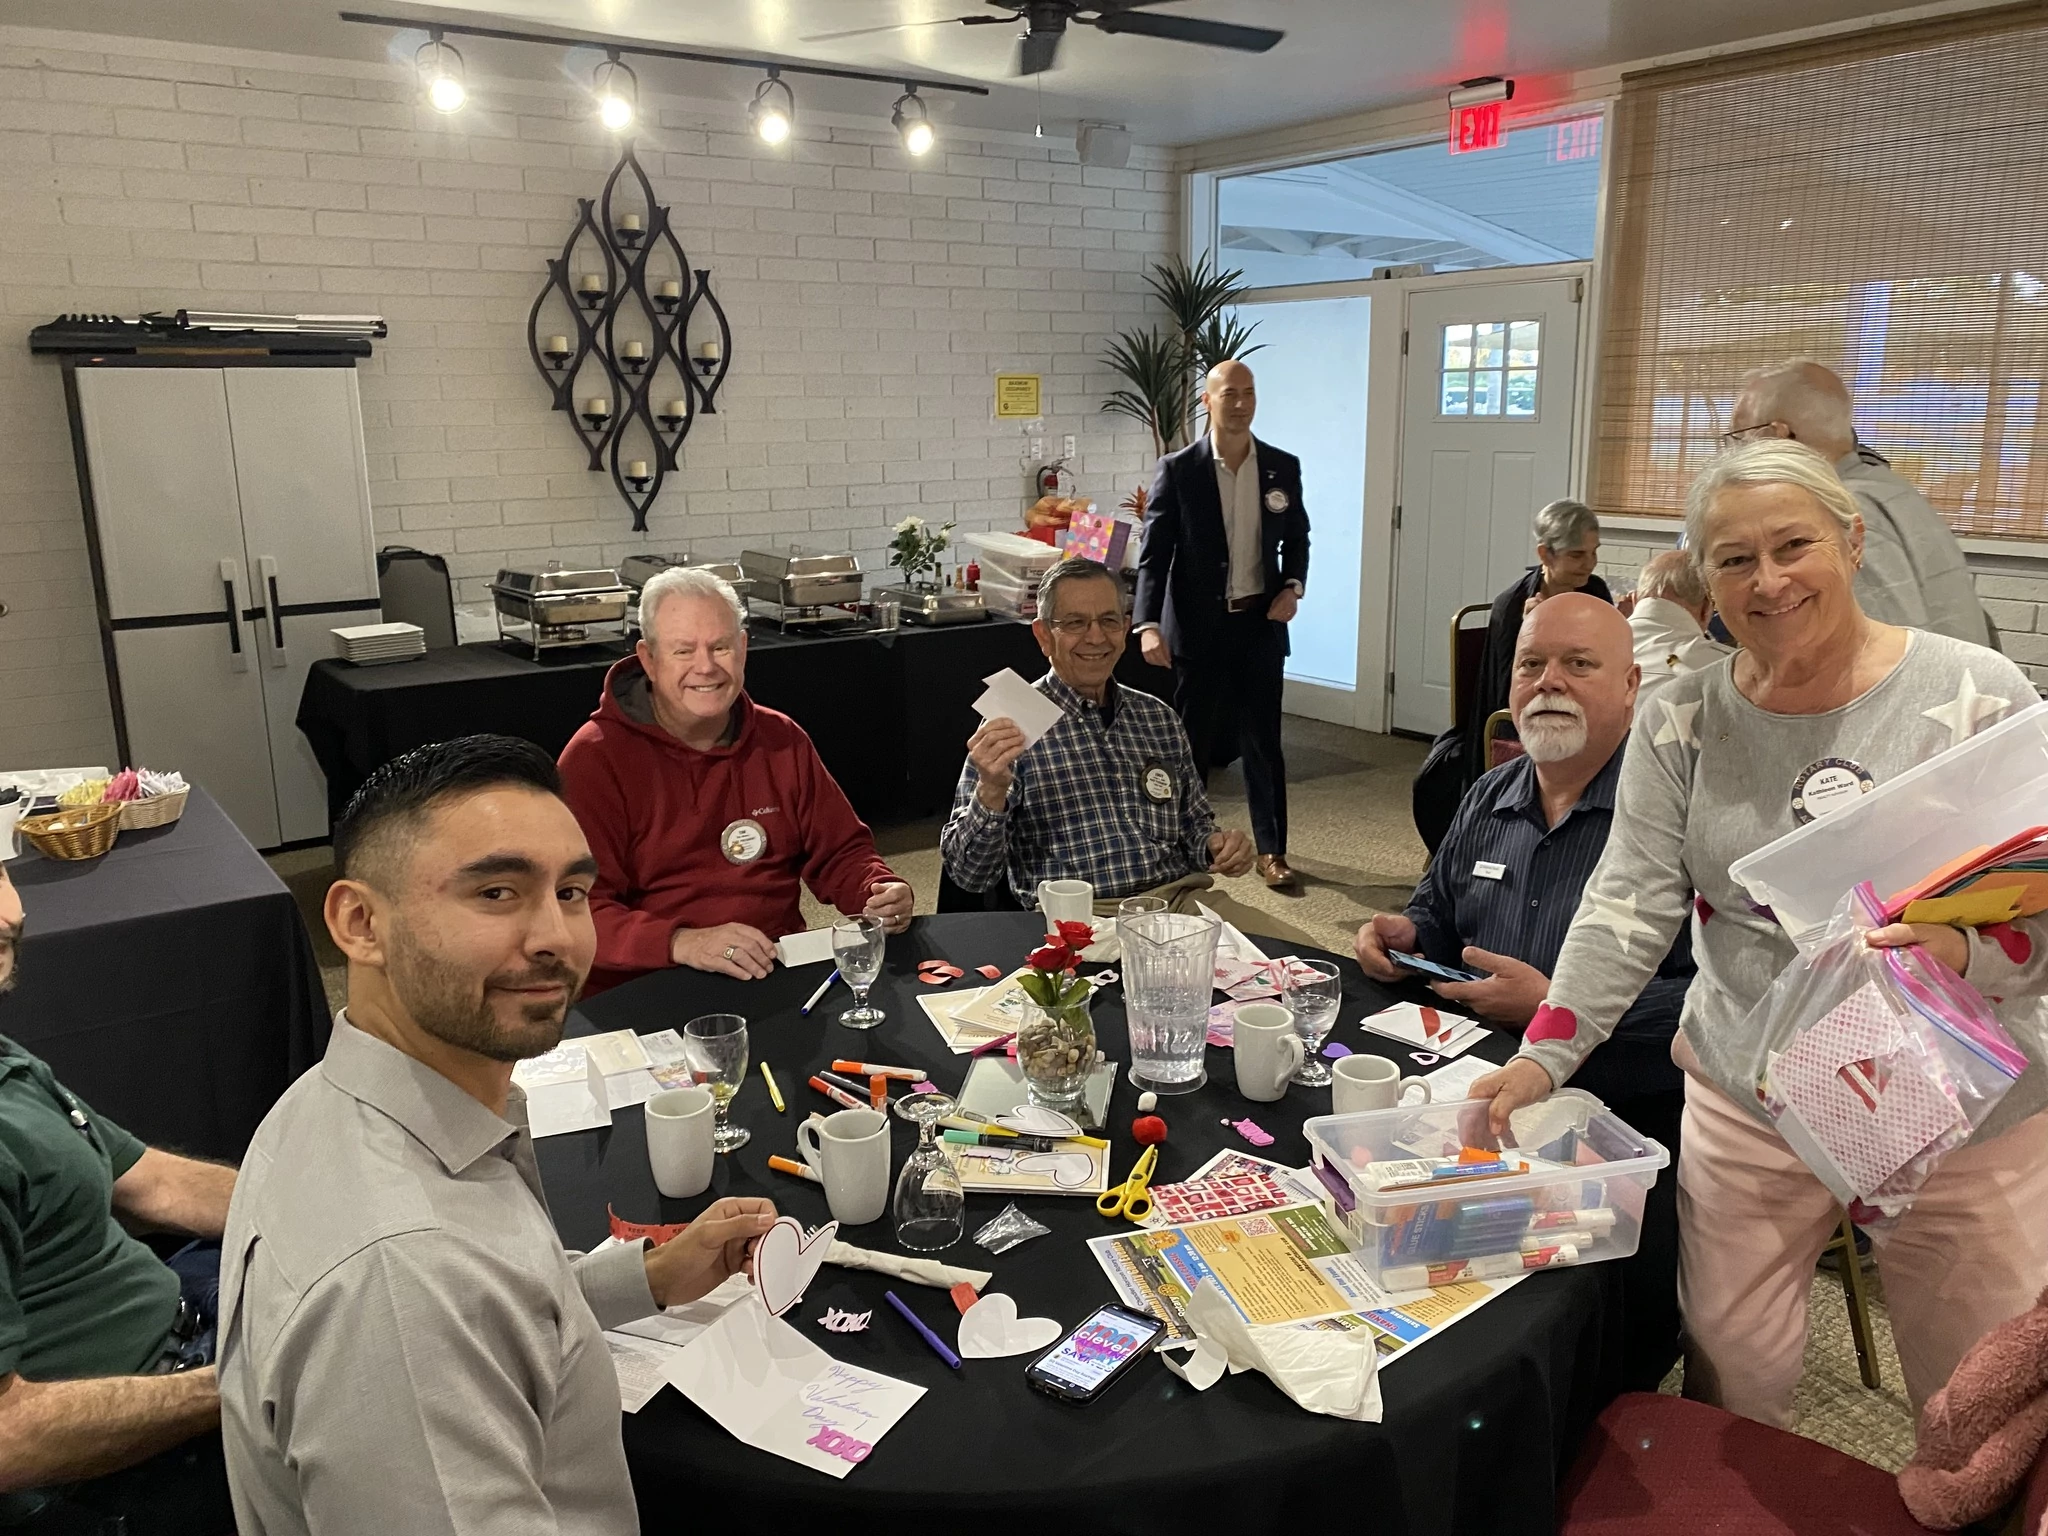 Many thanks to the Chandler Horizon Rotary Club for kindly handmaking Valentine's Day Cards for our Senior card drive!